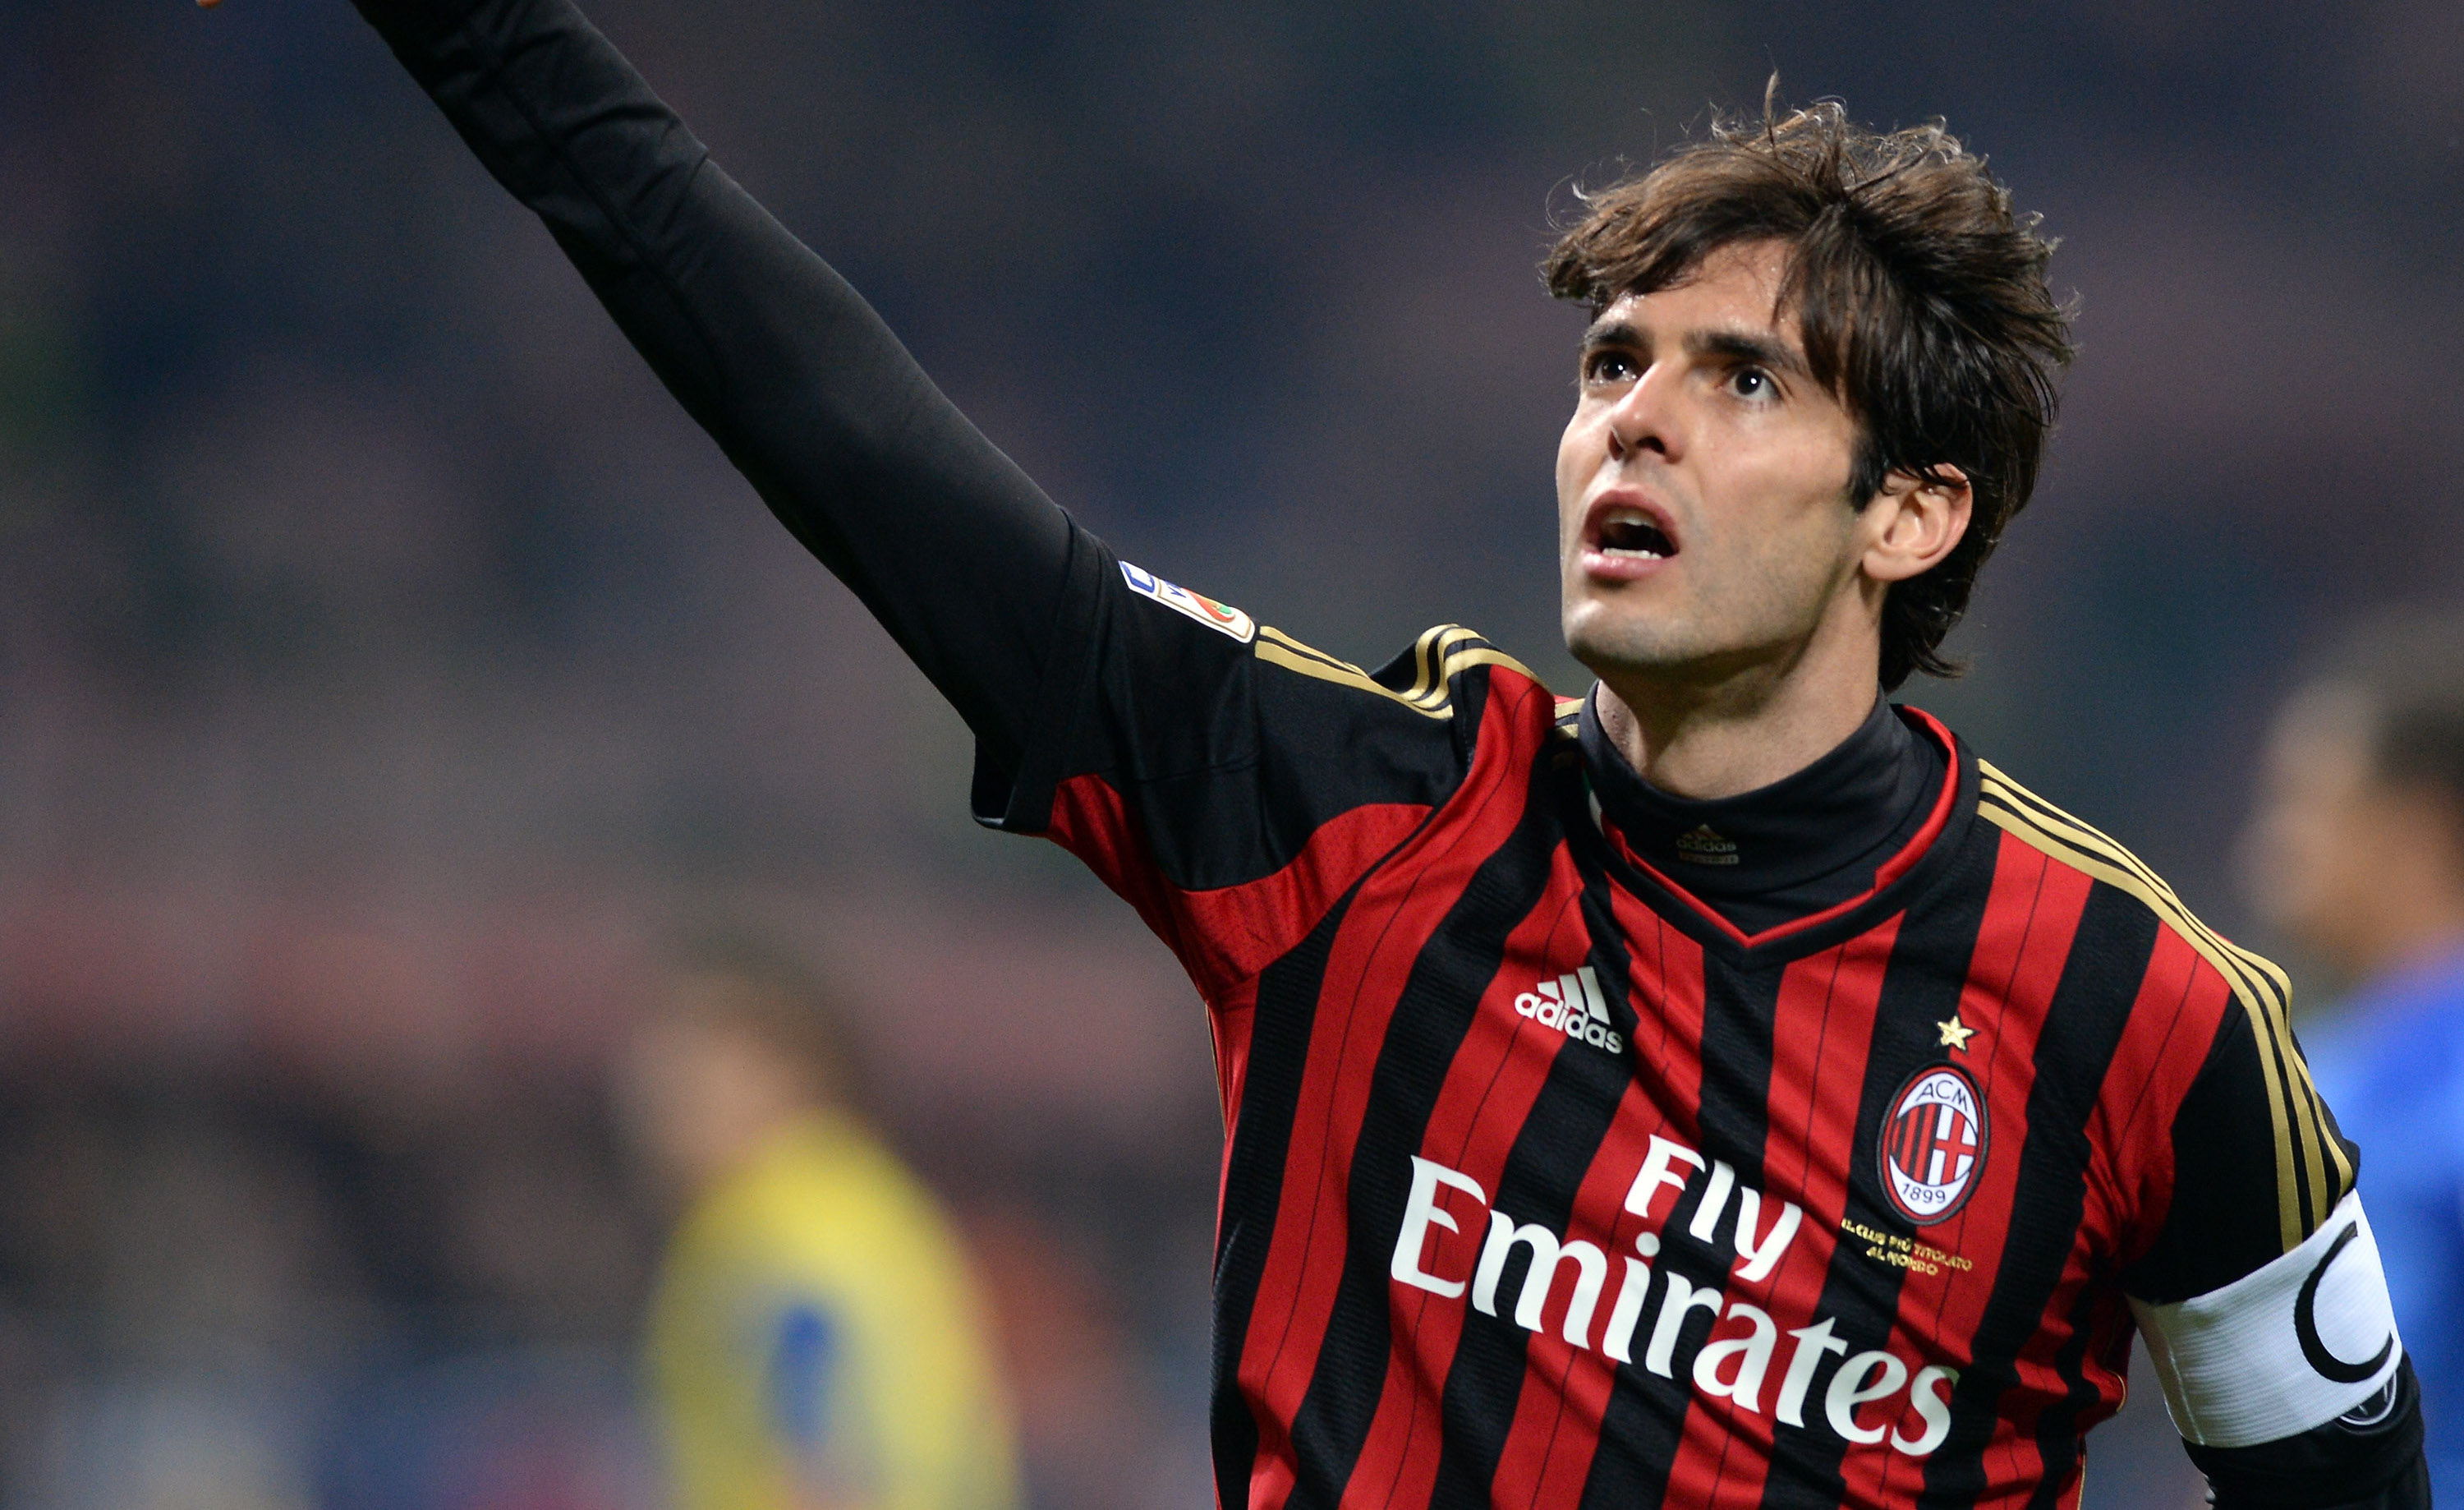 Kaka: "Milan are on the right track; Maldini is great example for me"